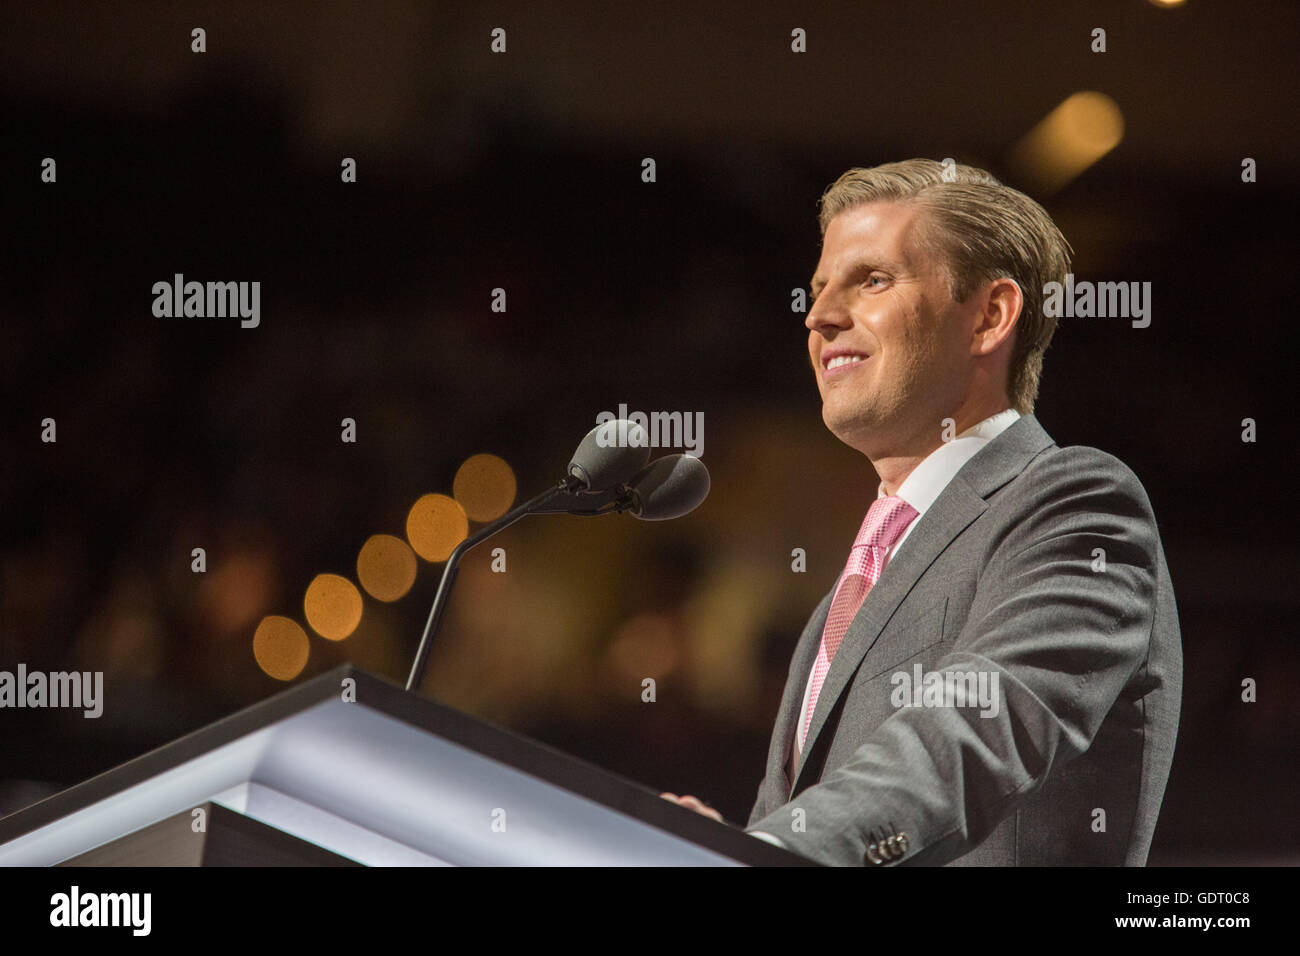 Cleveland, Ohio, USA; July 20, 2016: Eric Trump, son of Donald Trump, speaks at Republican National Convention. (Philip Scalia/Alamy Live News) Stock Photo